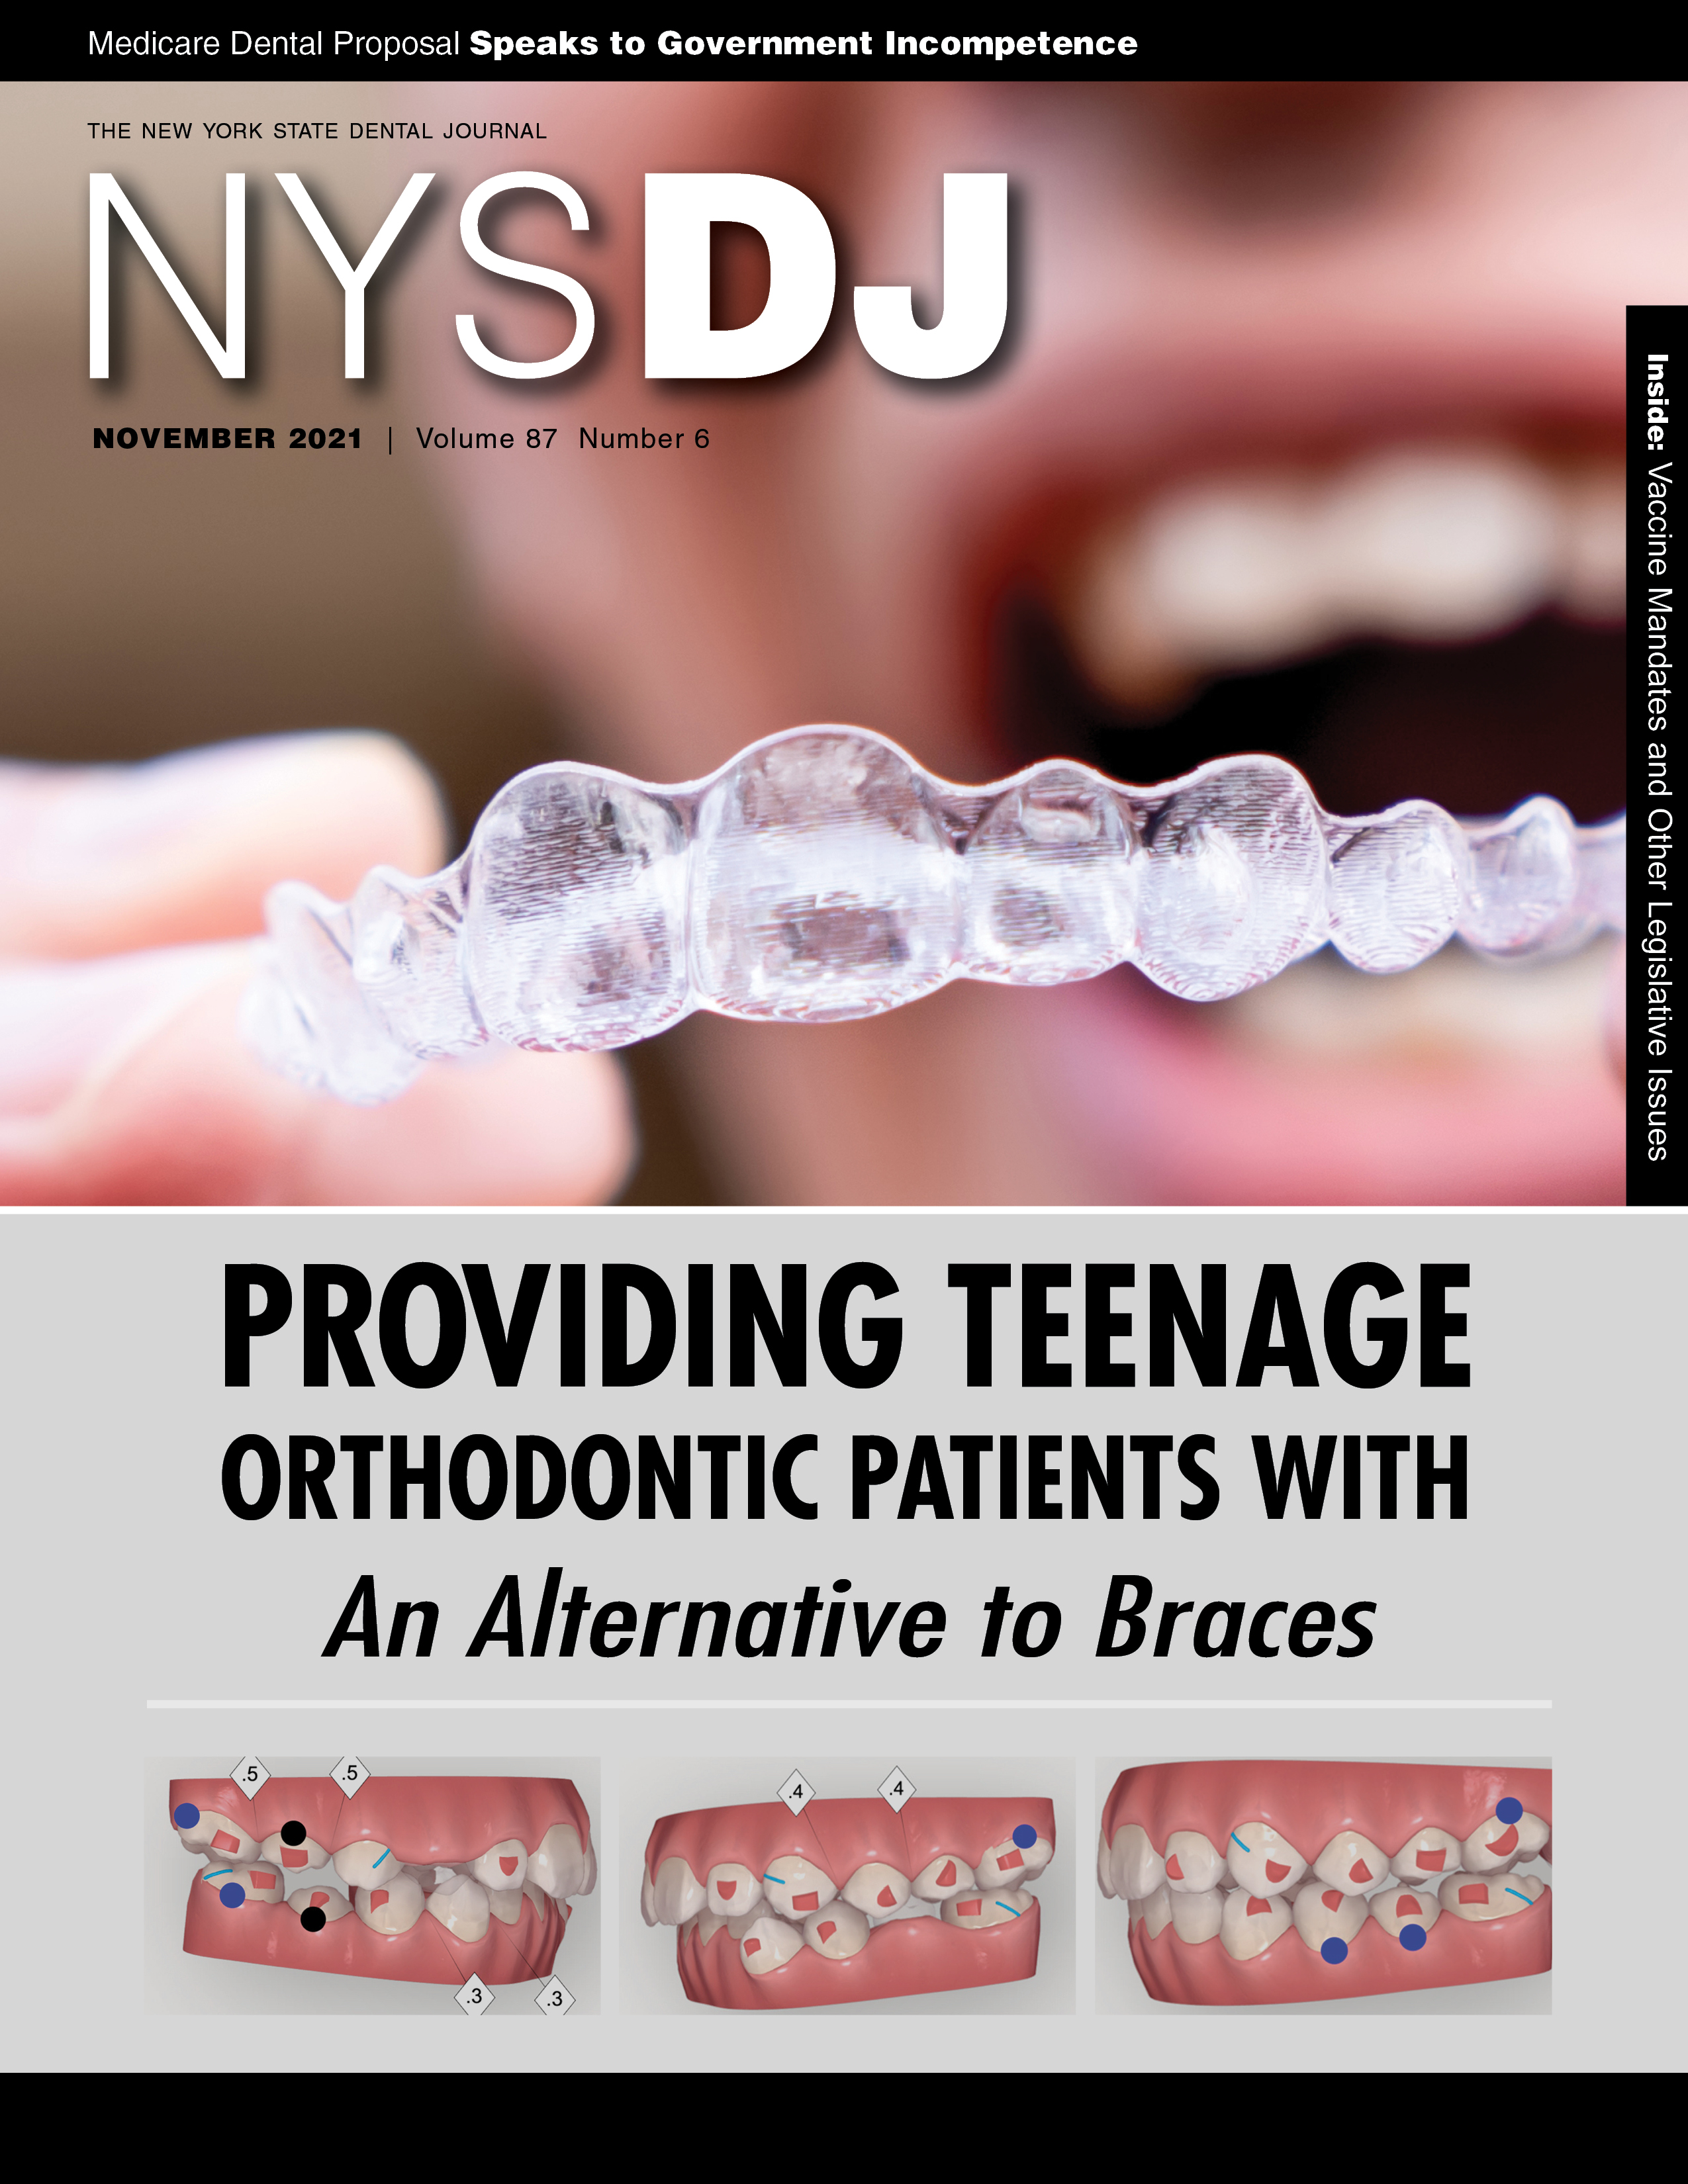 Cover of the NYSDJ with a photo of a person putting in their invisible aligner. Three orthodontic illustrations are below.